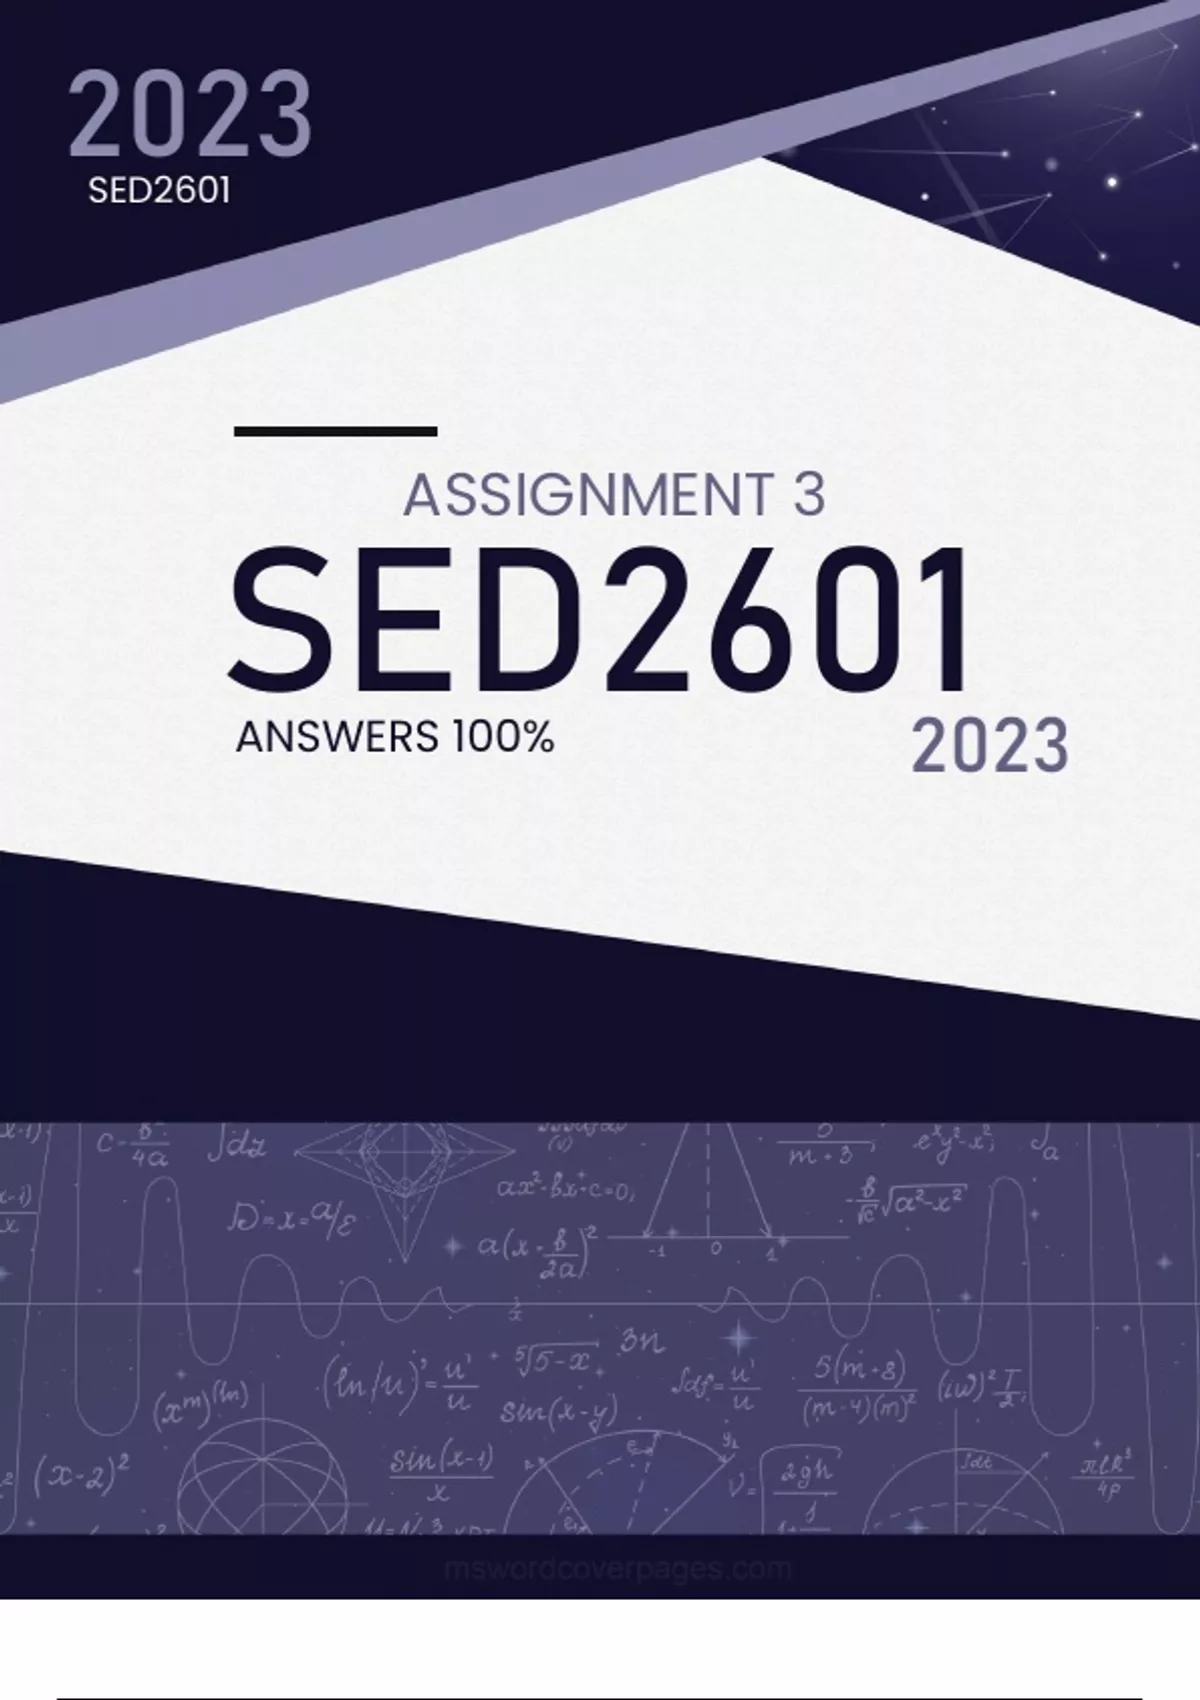 sed2601 assignment 3 2023